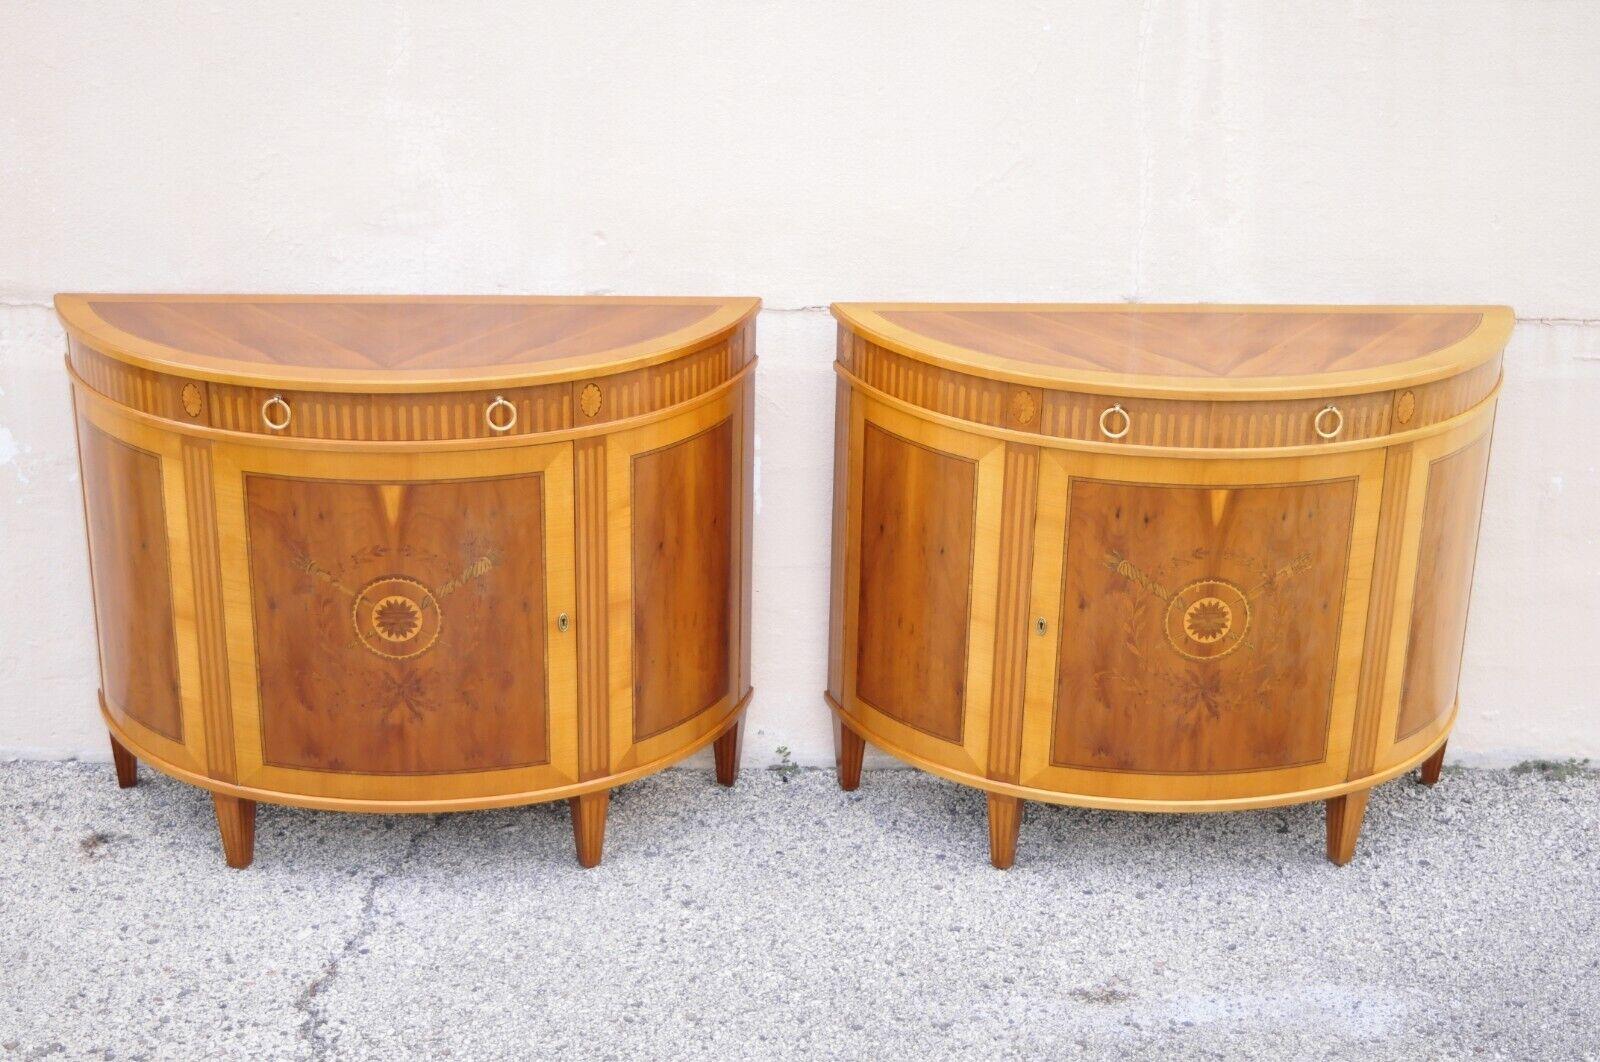 Colombo Mobili French Louis XVI Yew Wood Inlay Demilune Commode Cabinet, a Pair 6